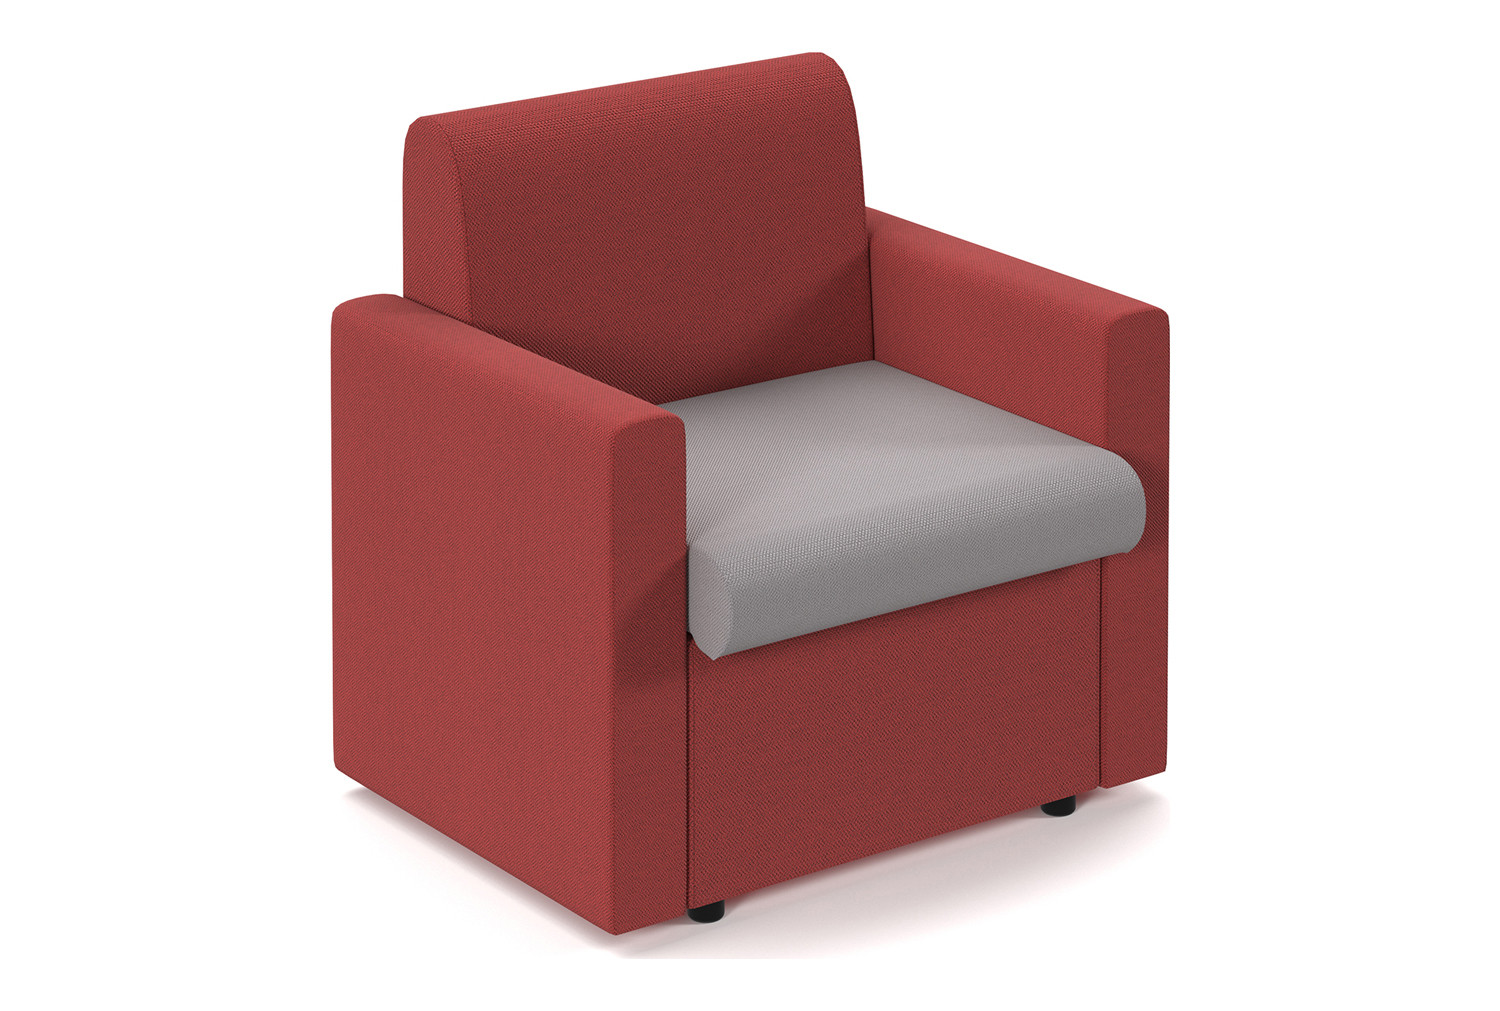 Portland 2 Tone Modular Soft Seating, Armchair, Forecast Grey Seat/Extent Red Back, Fully Installed